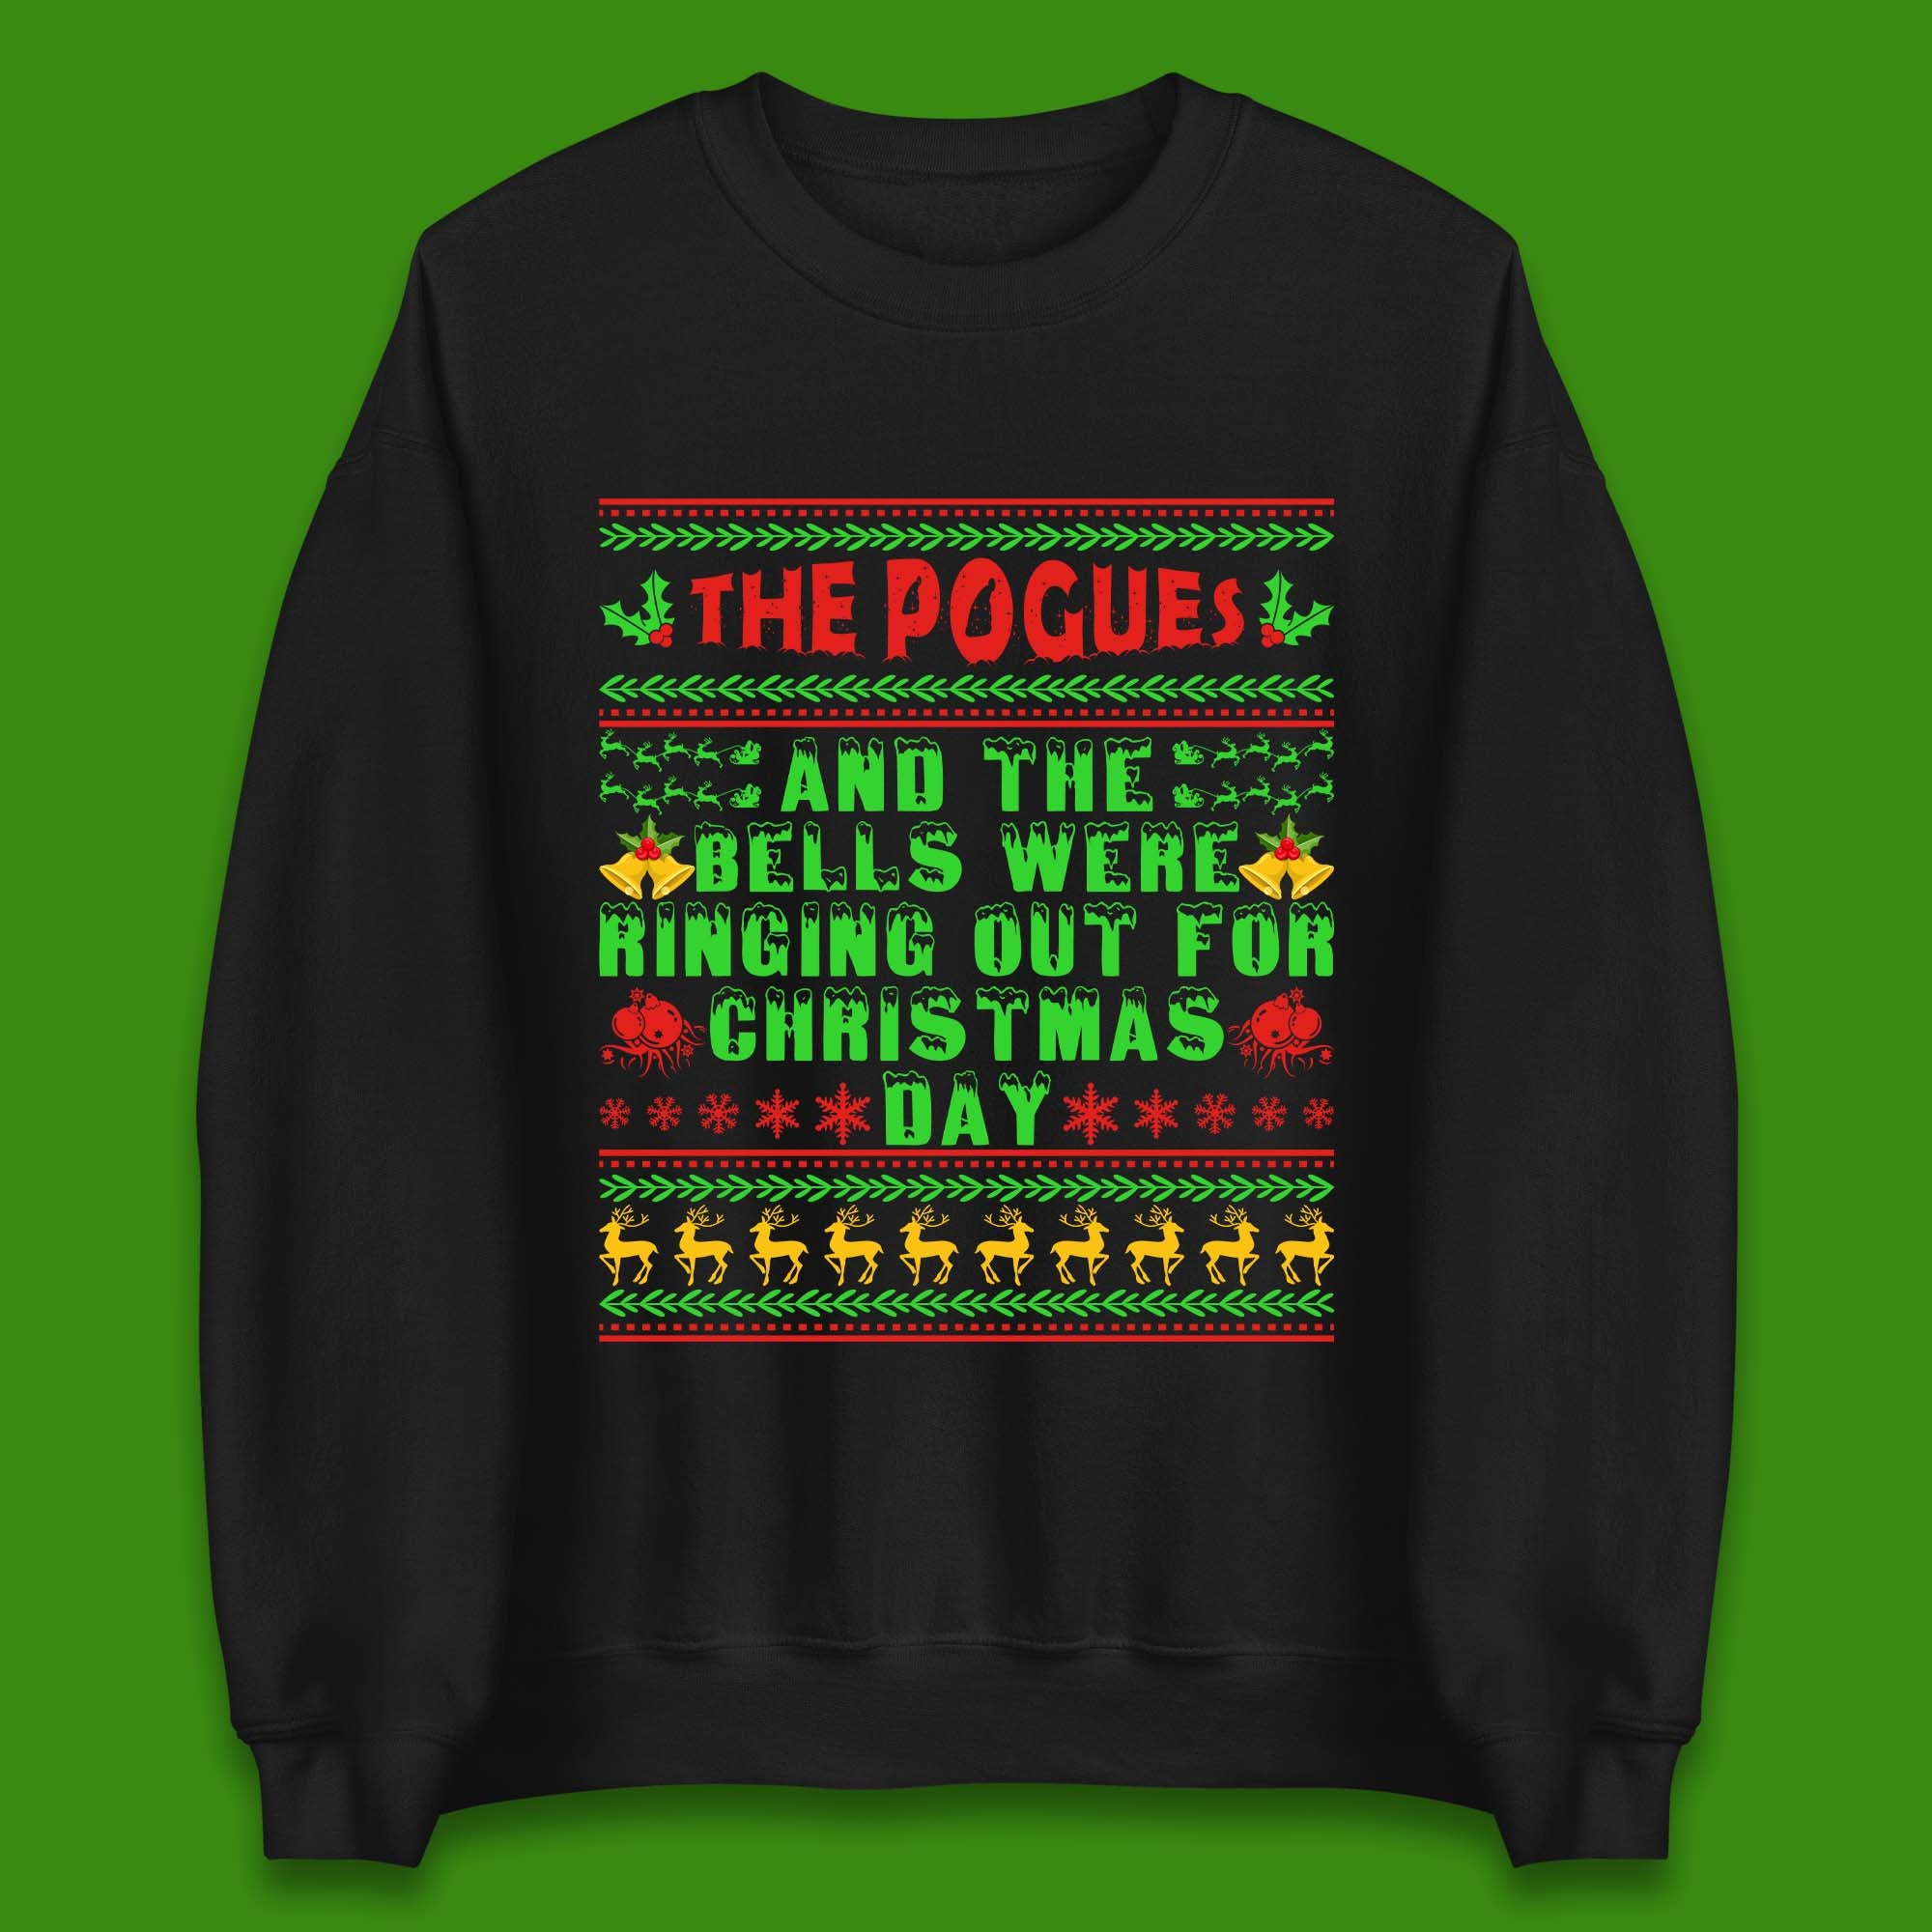 The Pogues Christmas Jumper